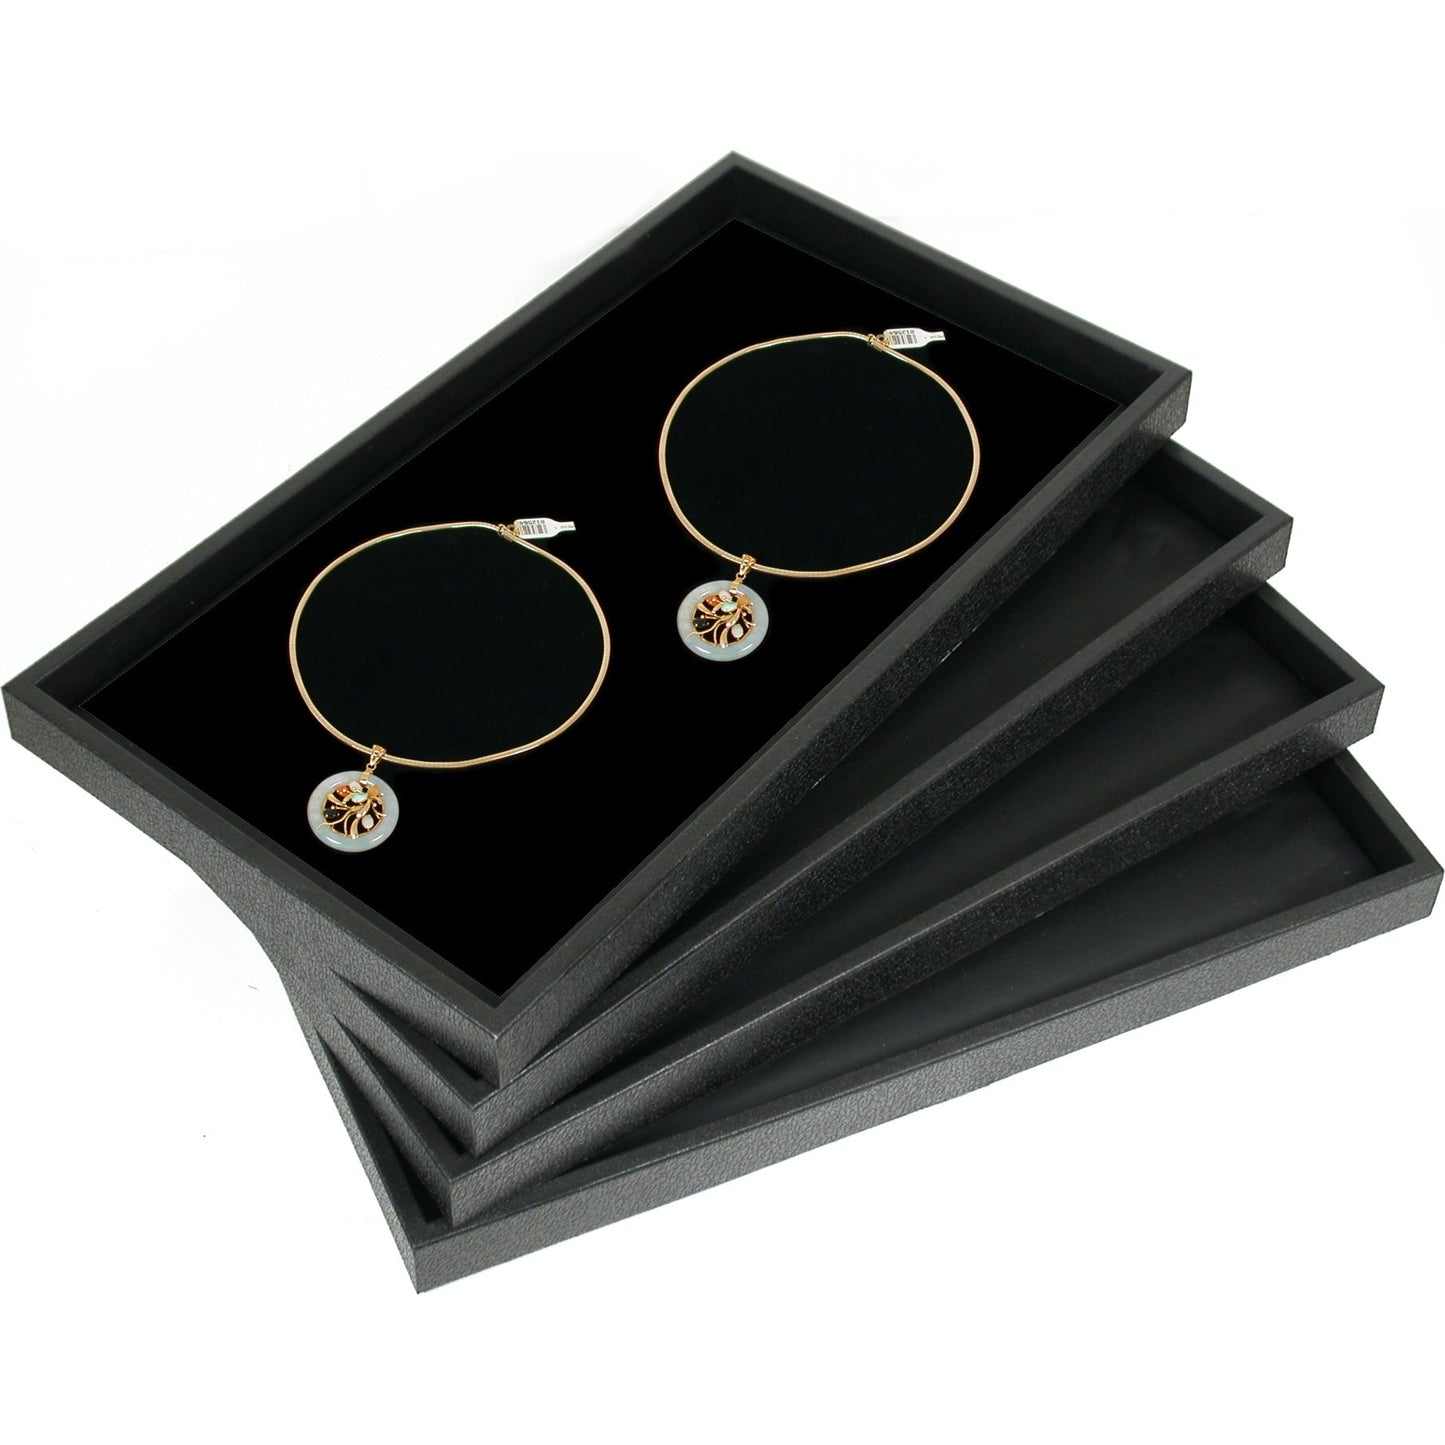 Carrying Case & Jewelry Trays 17Pcs